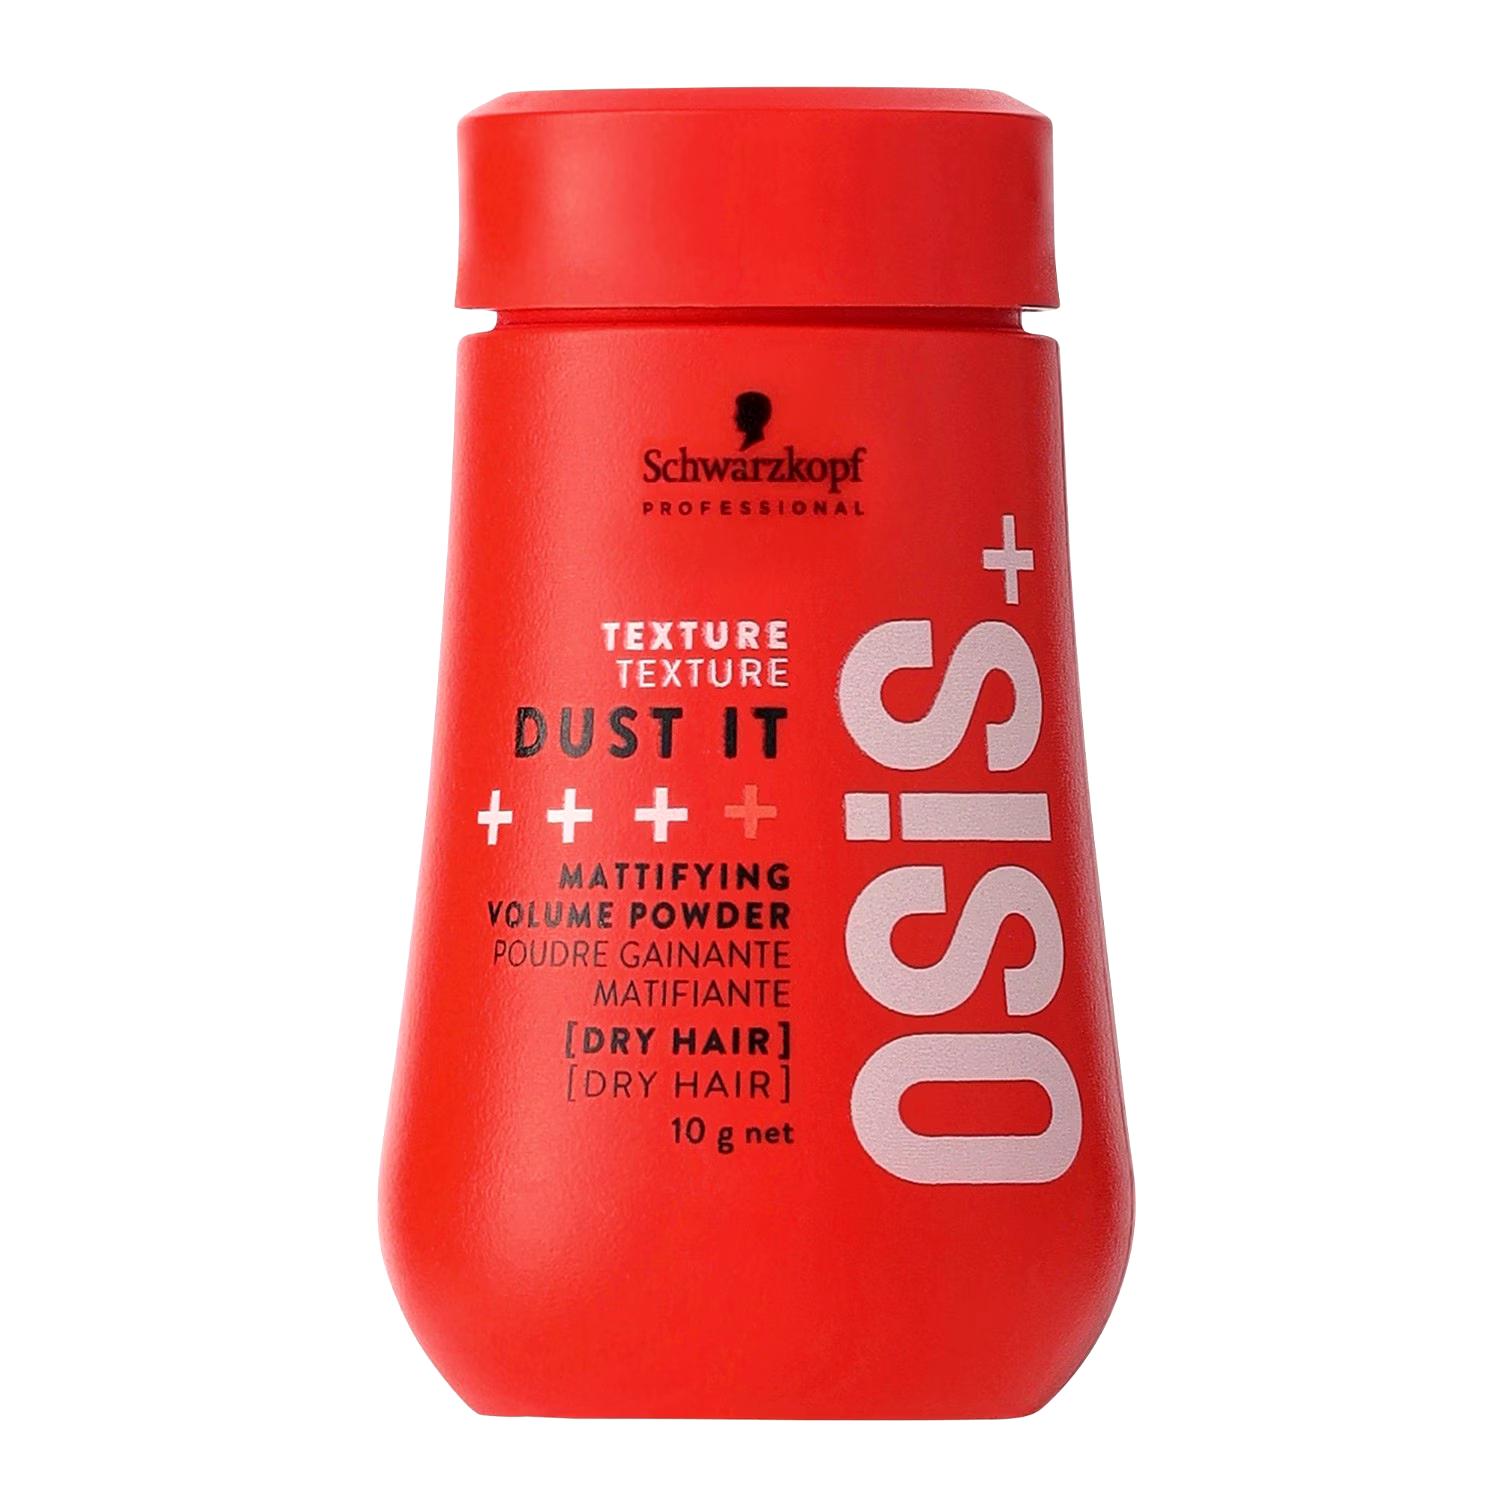 OSIS+ Texture dust IT